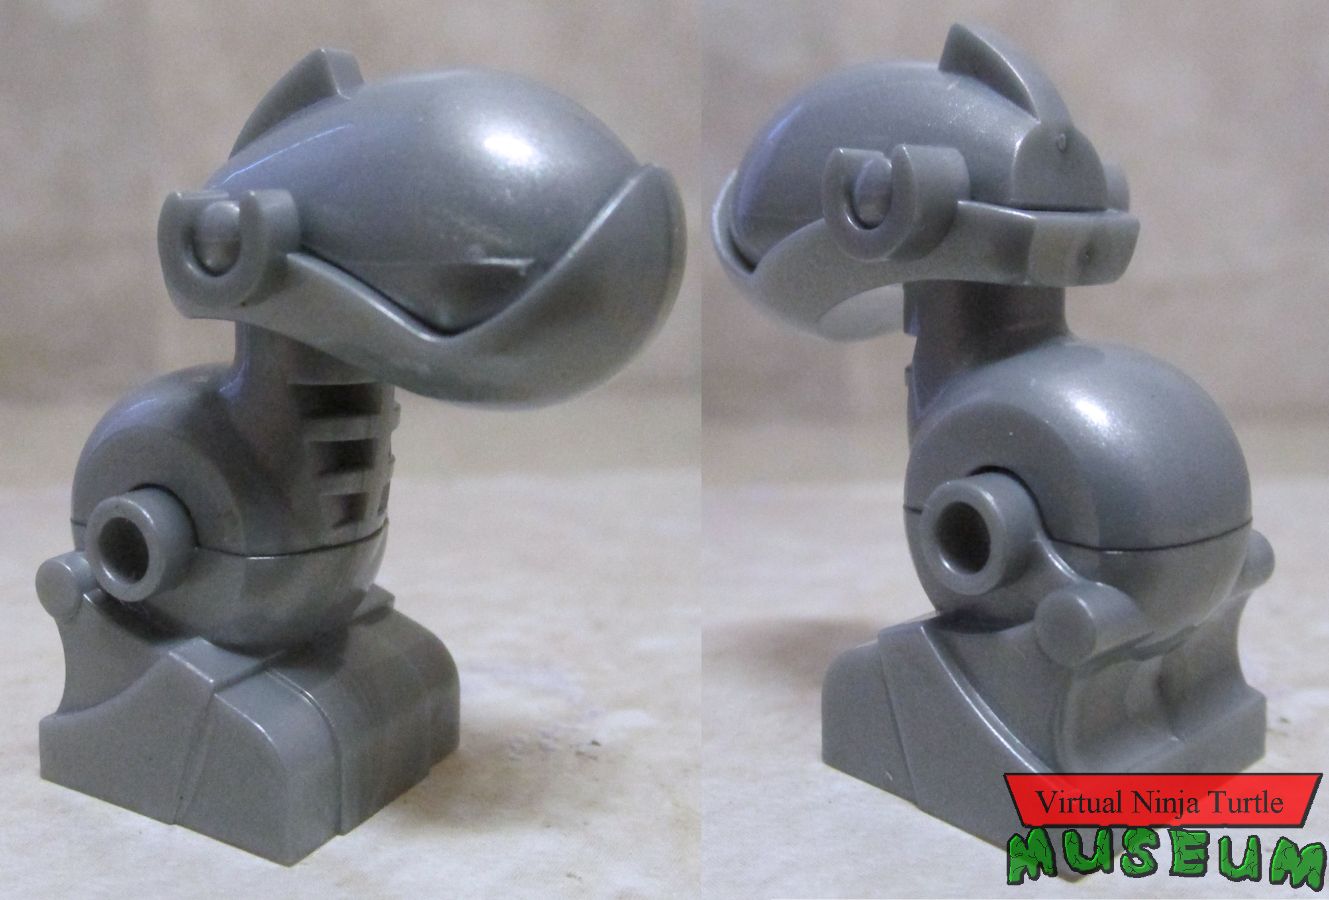 mouser front and back